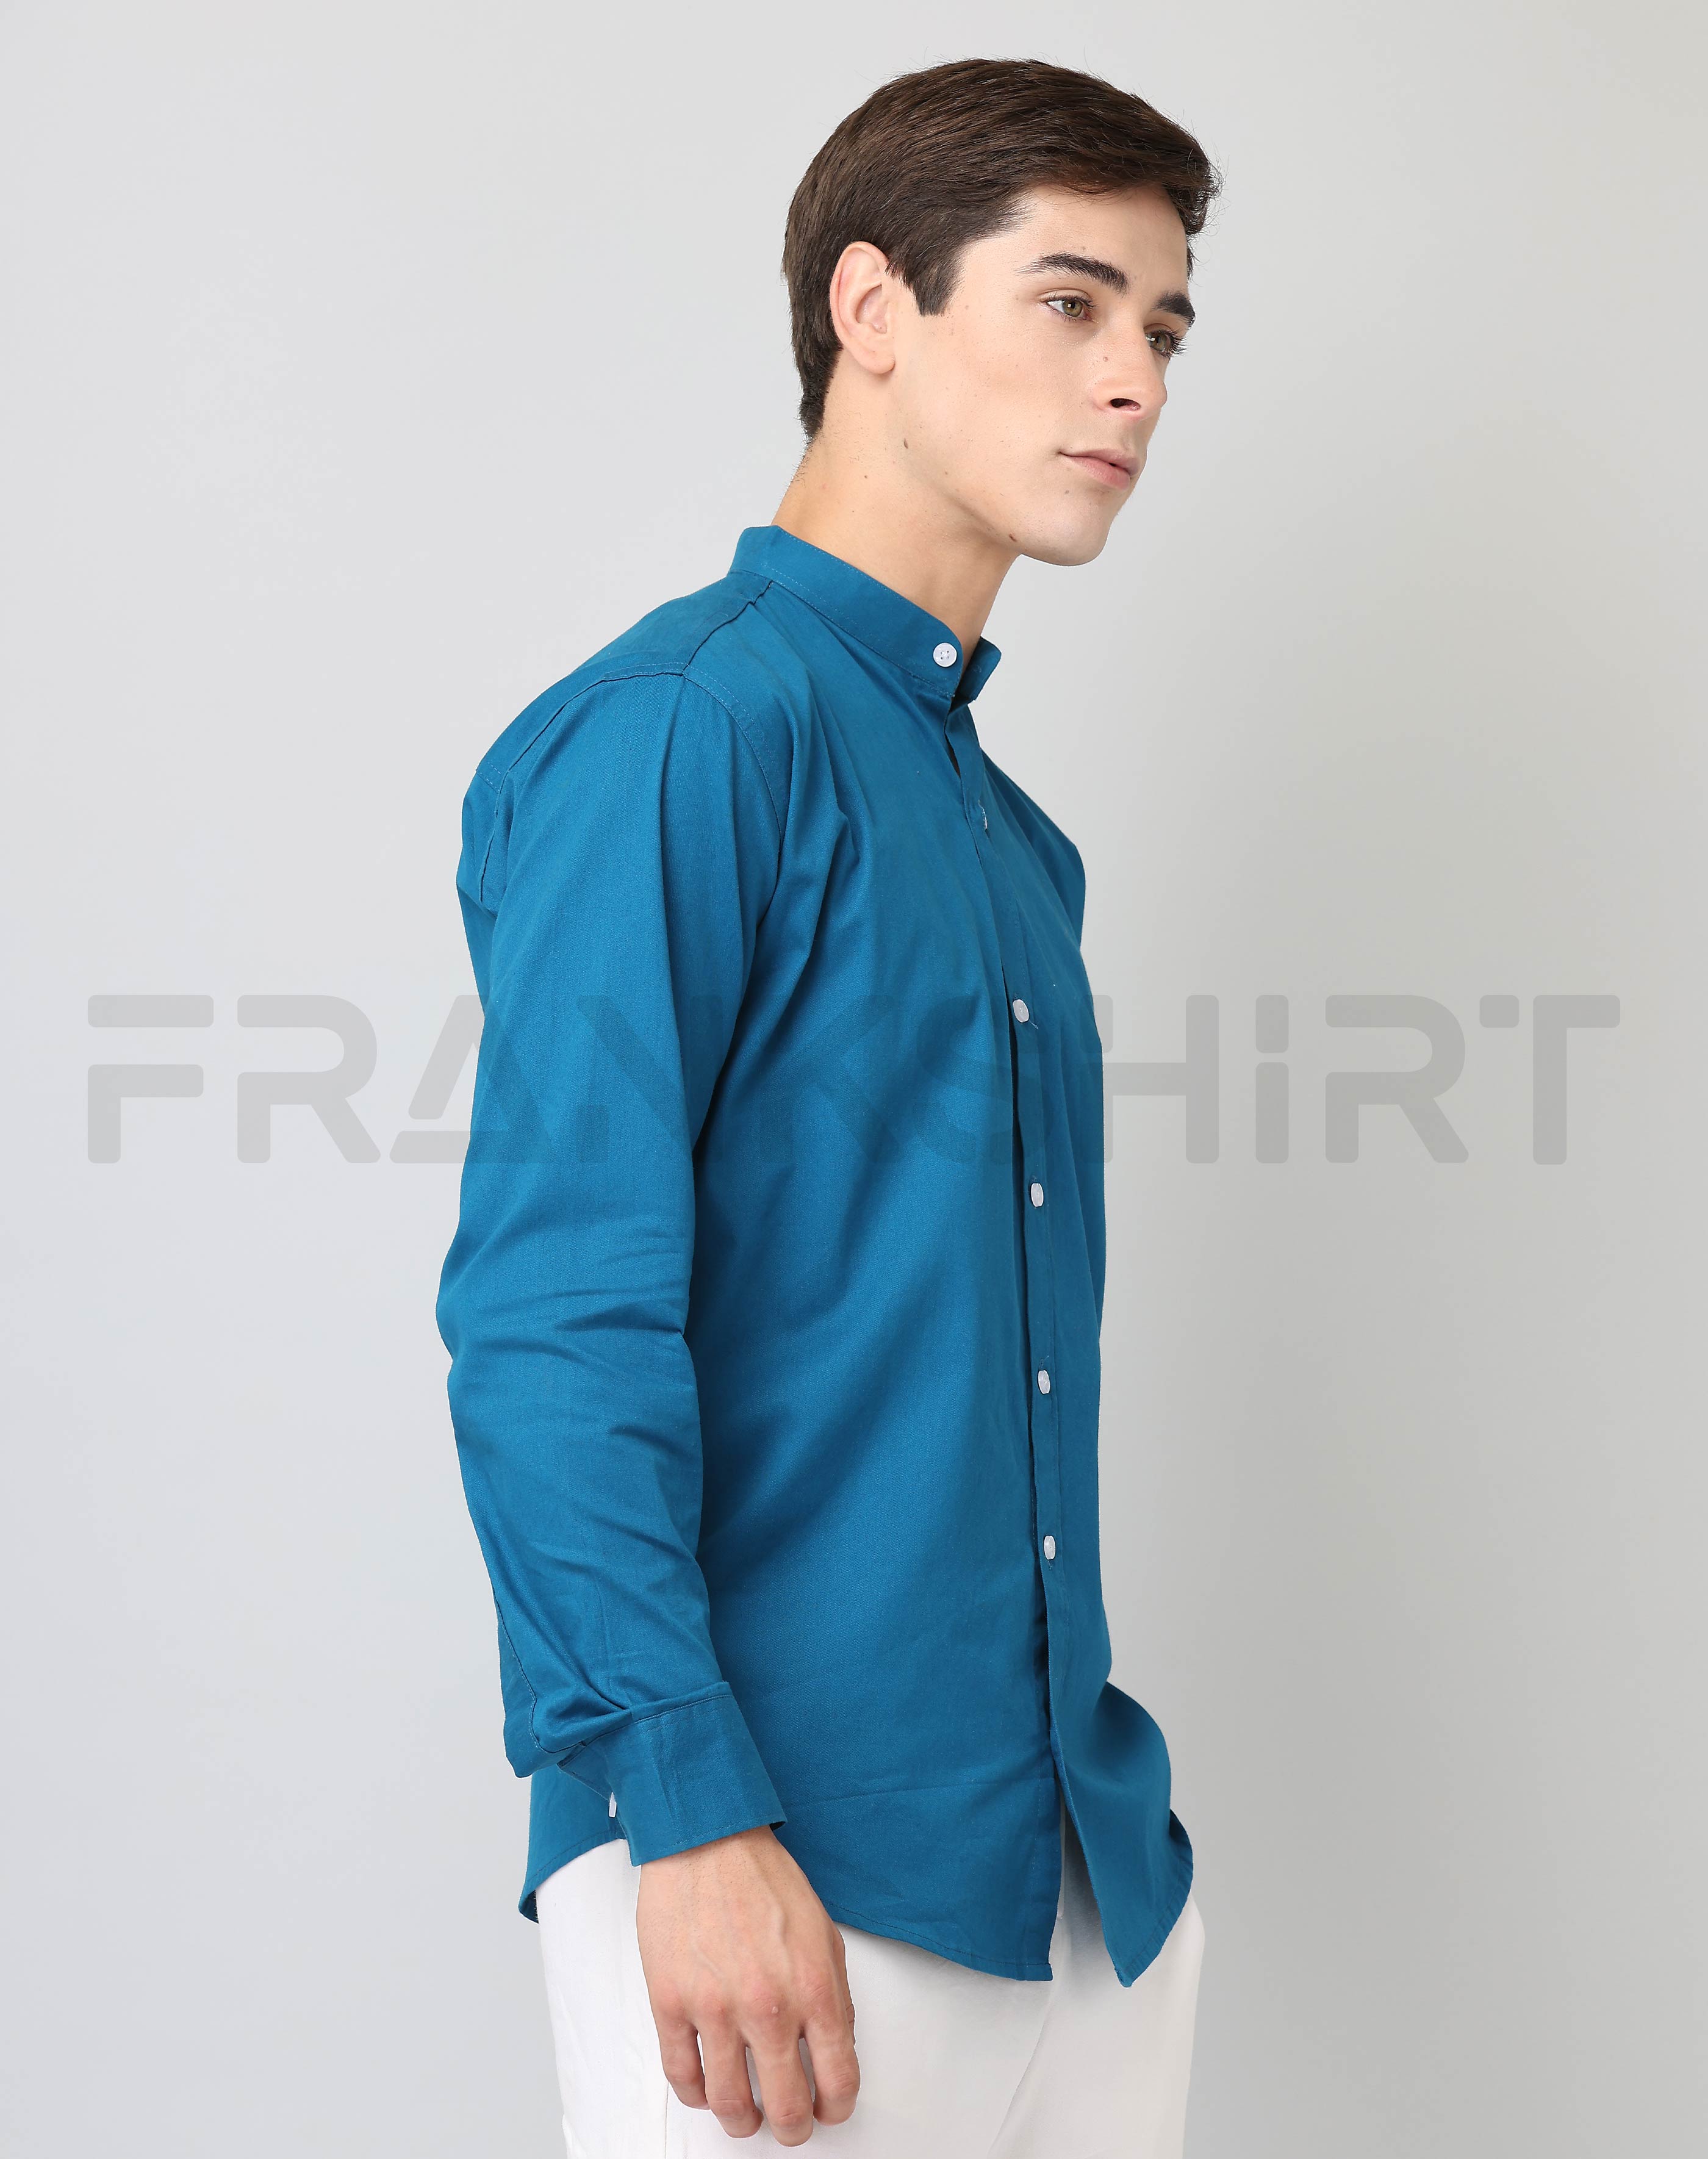 Frankshirt Chinese Collar Peacocke Blue Solid Tailored Fit Cotton Casual Shirt for Man